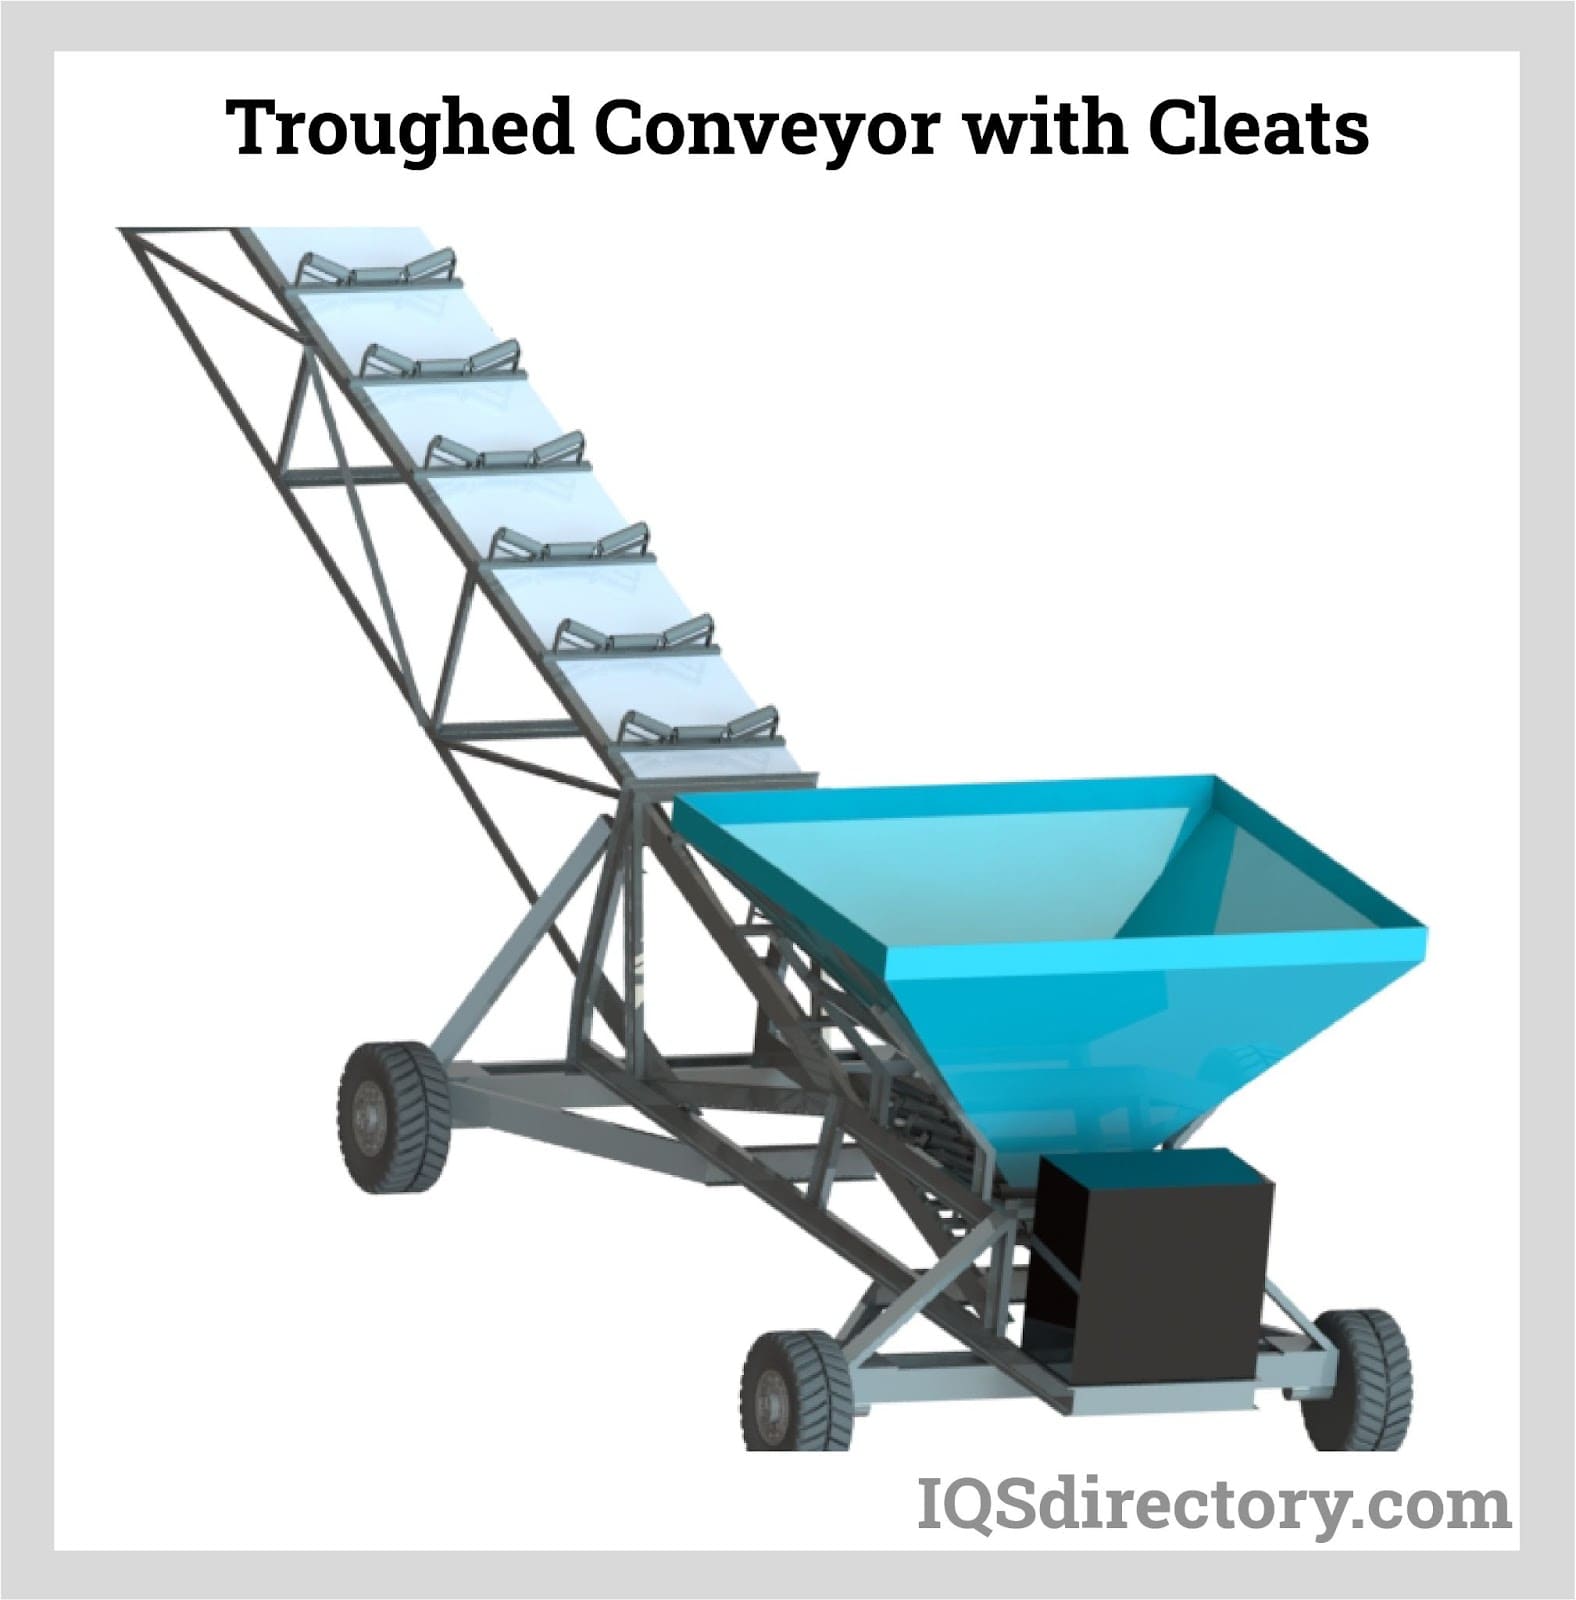 Troughed Conveyor with Cleats